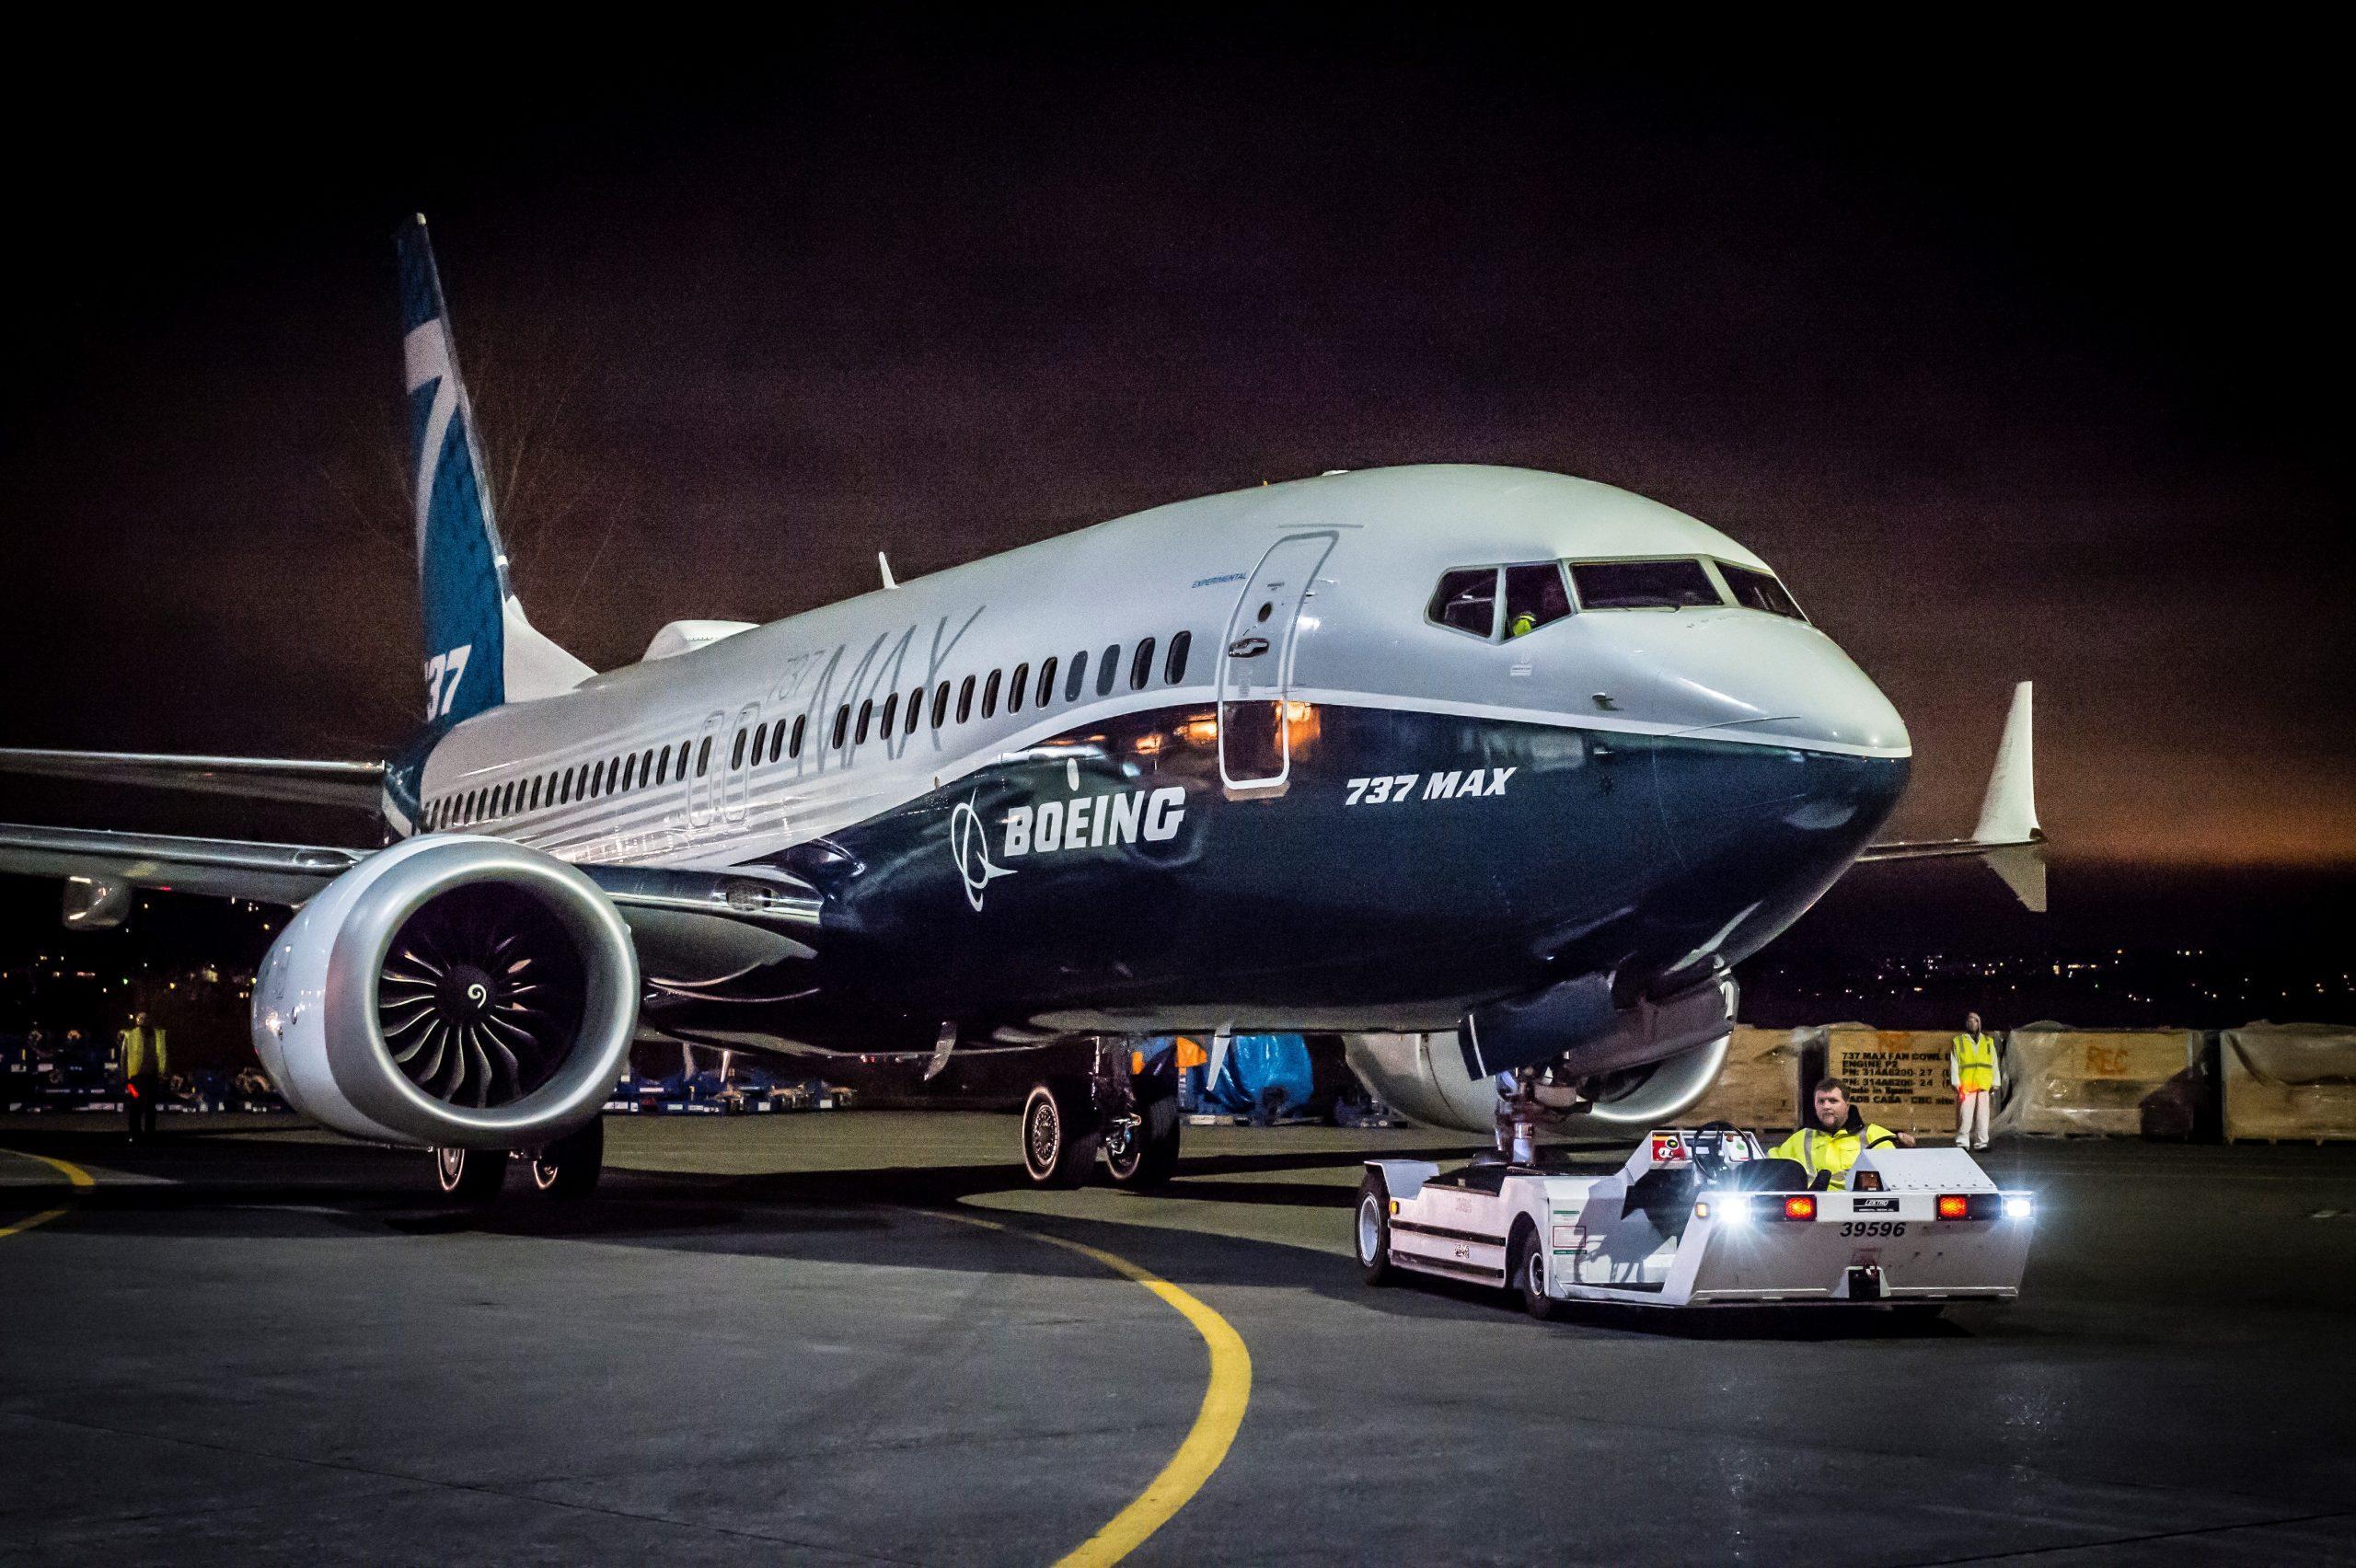 Restrictions on Boeing 737 MAX aircraft operations into and out of Singapore have been lifted by the Civil Aviation Authority of Singapore (CAAS) with effect from September 6.